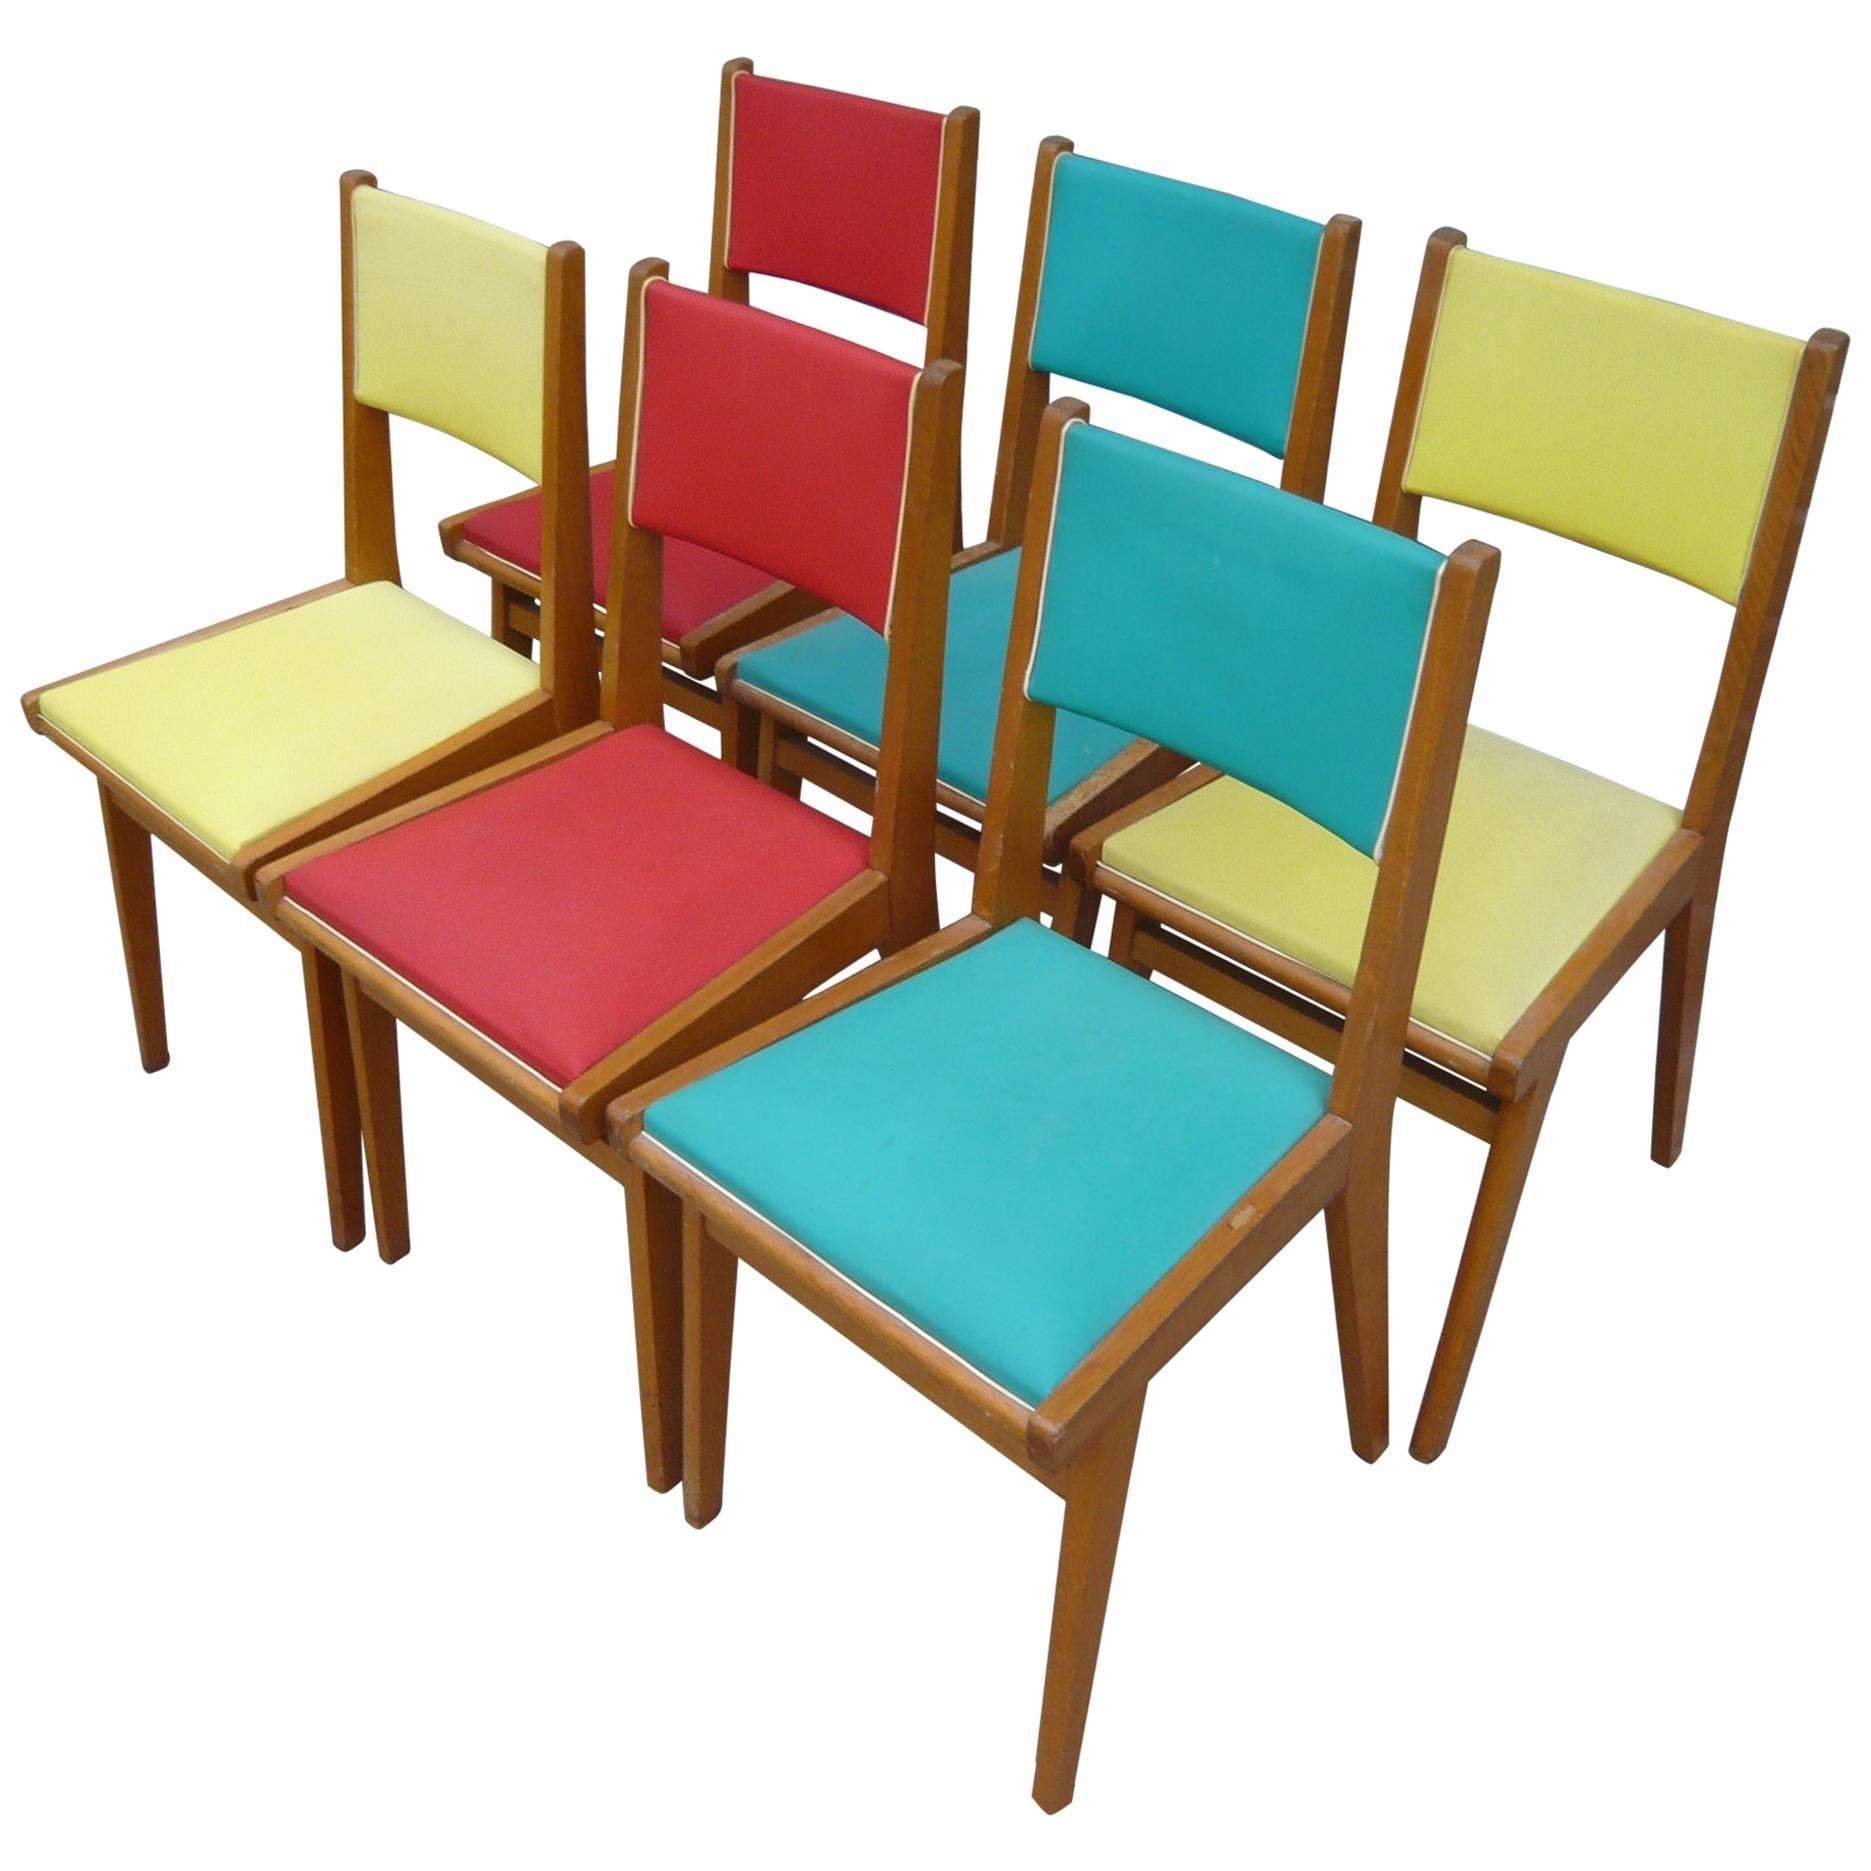 Set of Six French Chairs, Original Mid-Century Modern